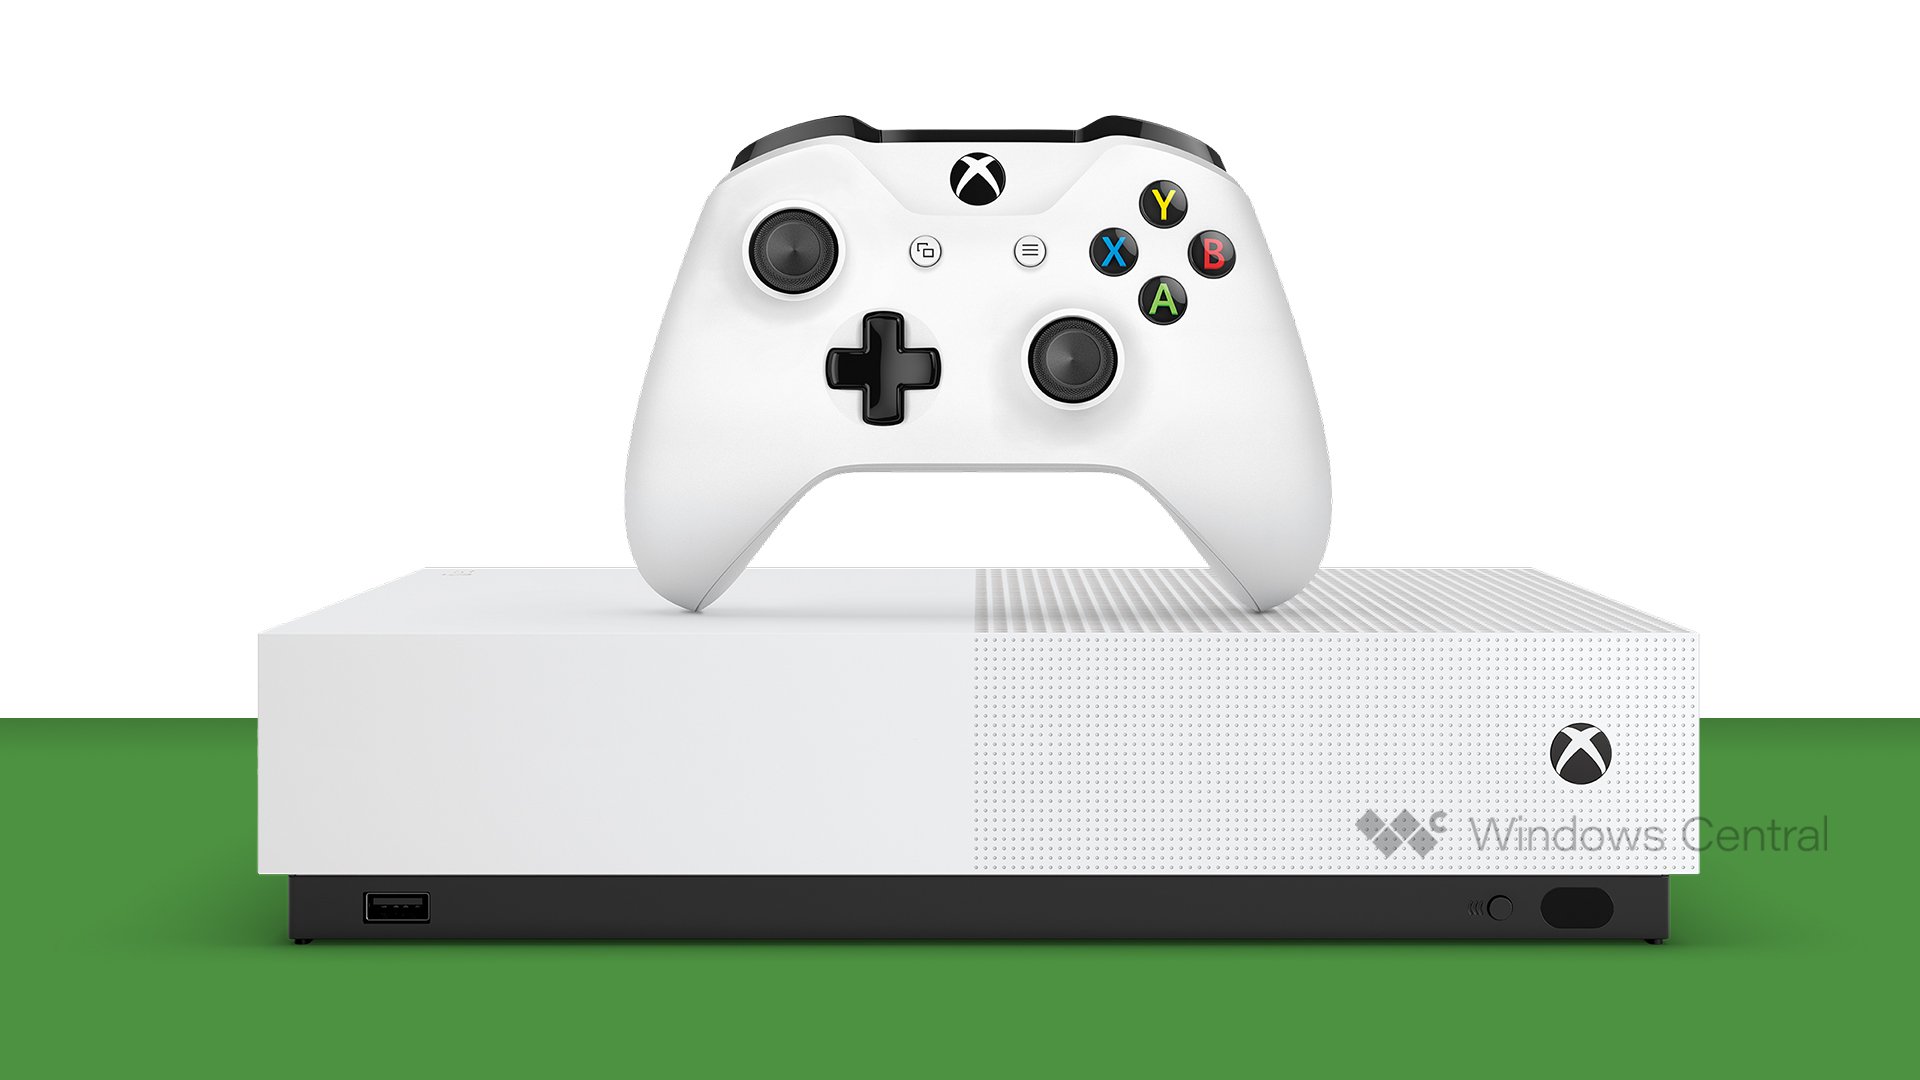 Discless Xbox One S 'all-digital' version ready for preorder in